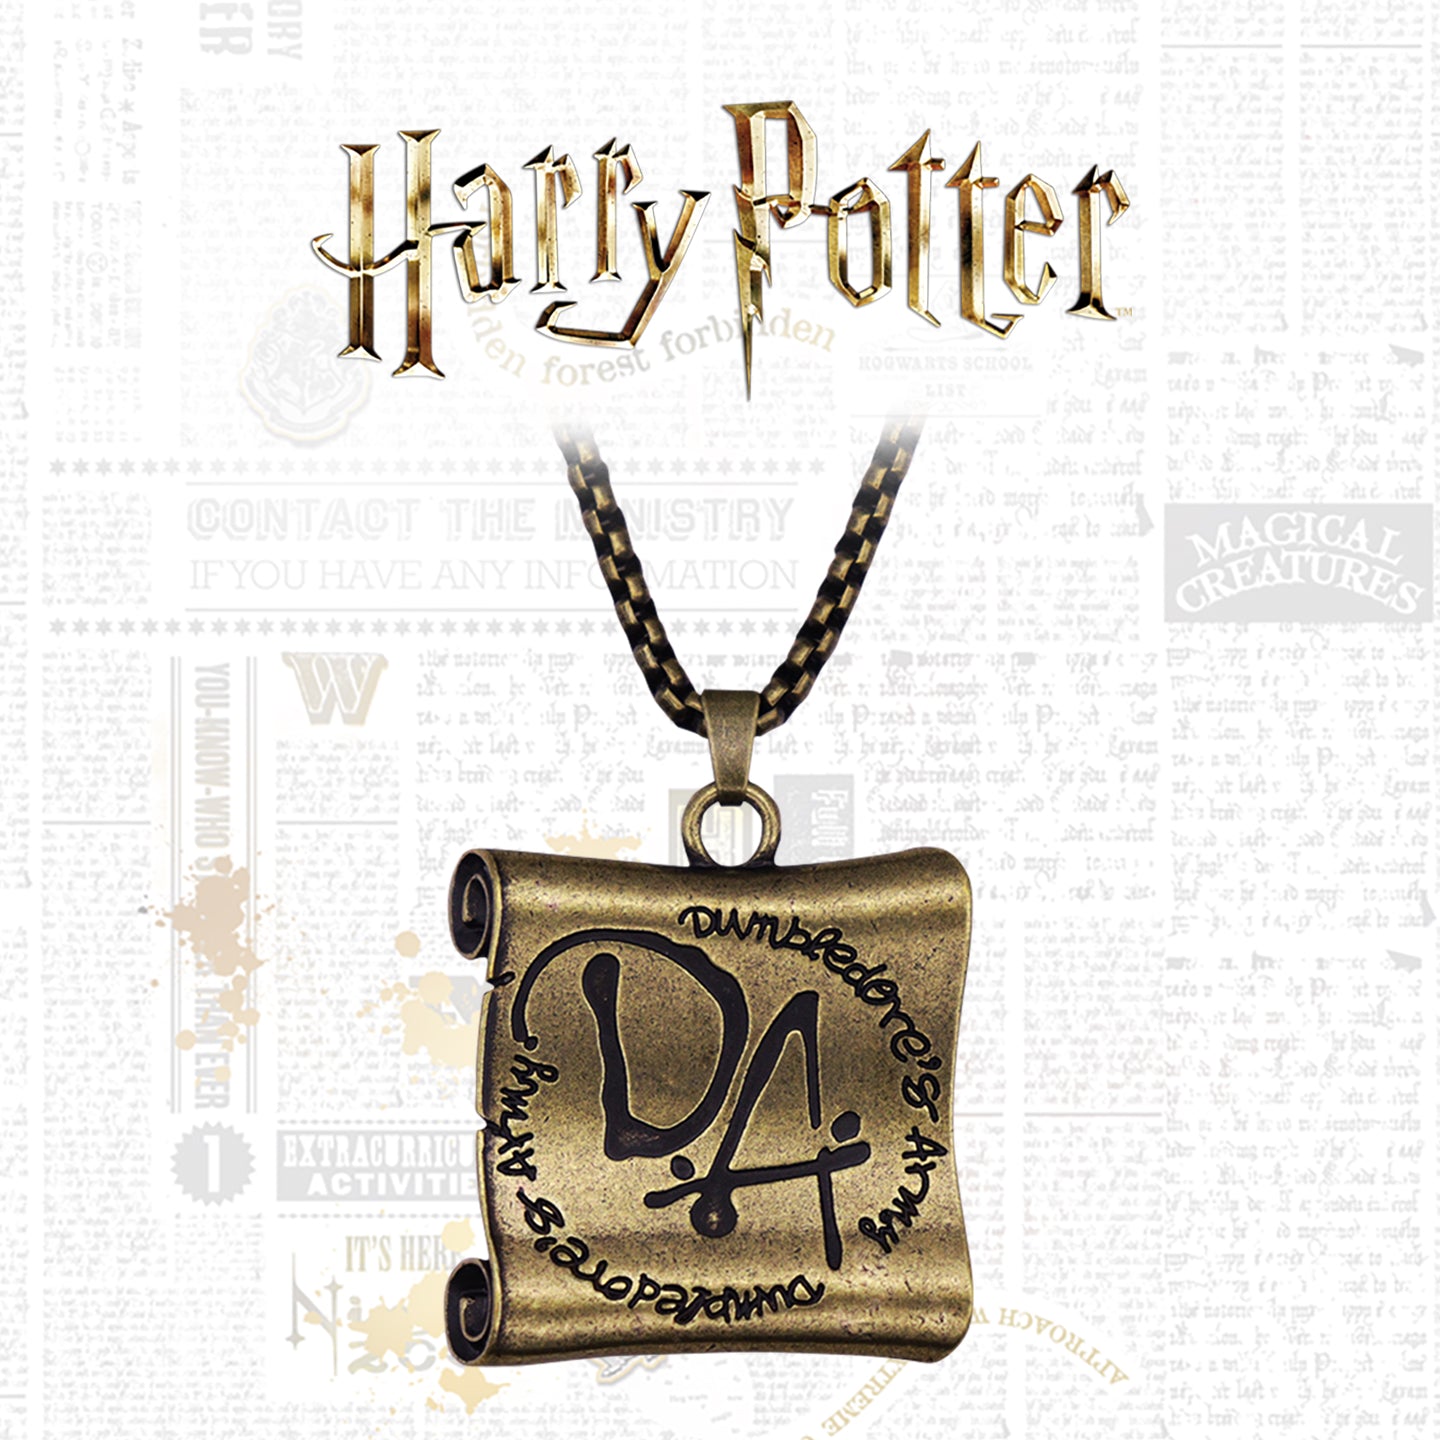 Harry Potter Dumbledore's Army Limited Edition Unisex Necklace